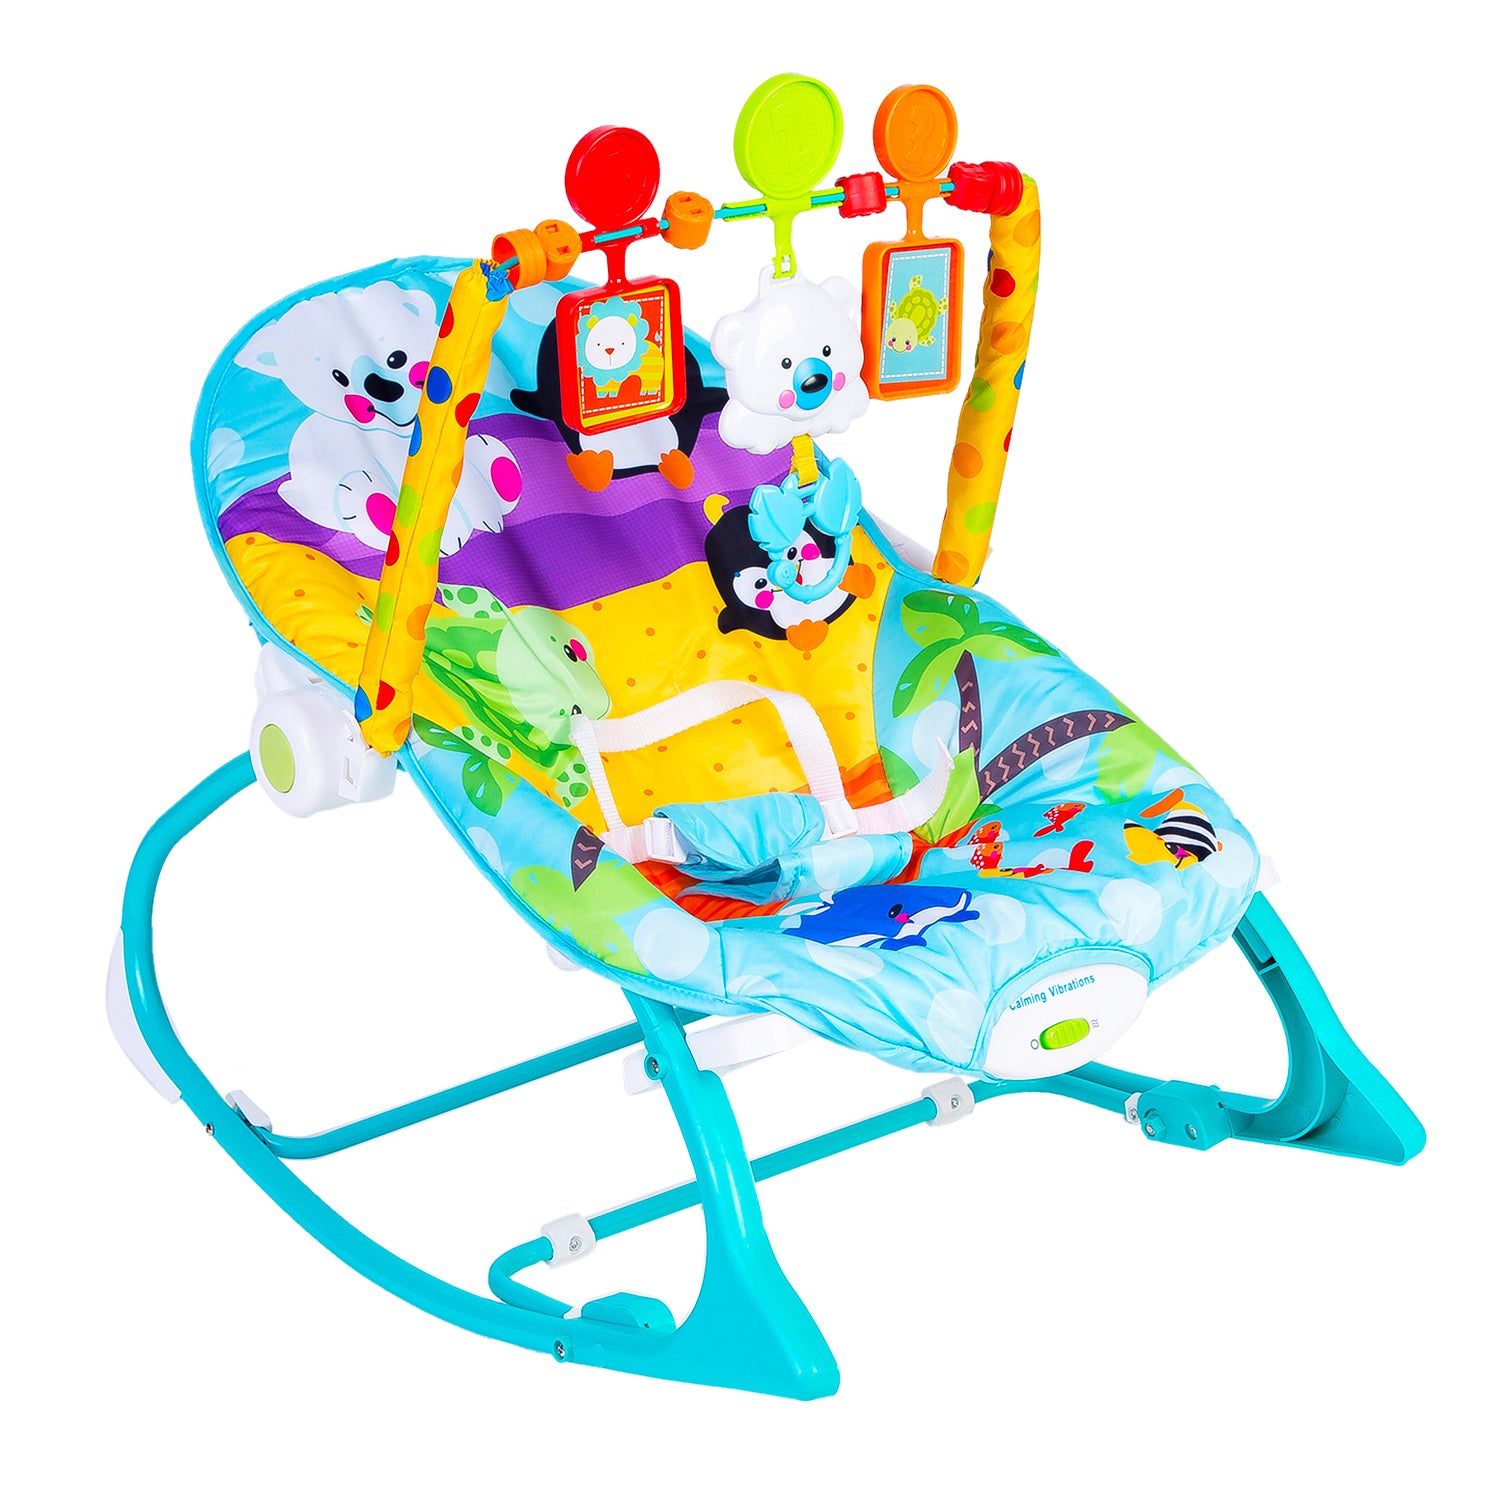 Newborn To Toddler Portable Rocker With Hanging Toys Beachy Blue